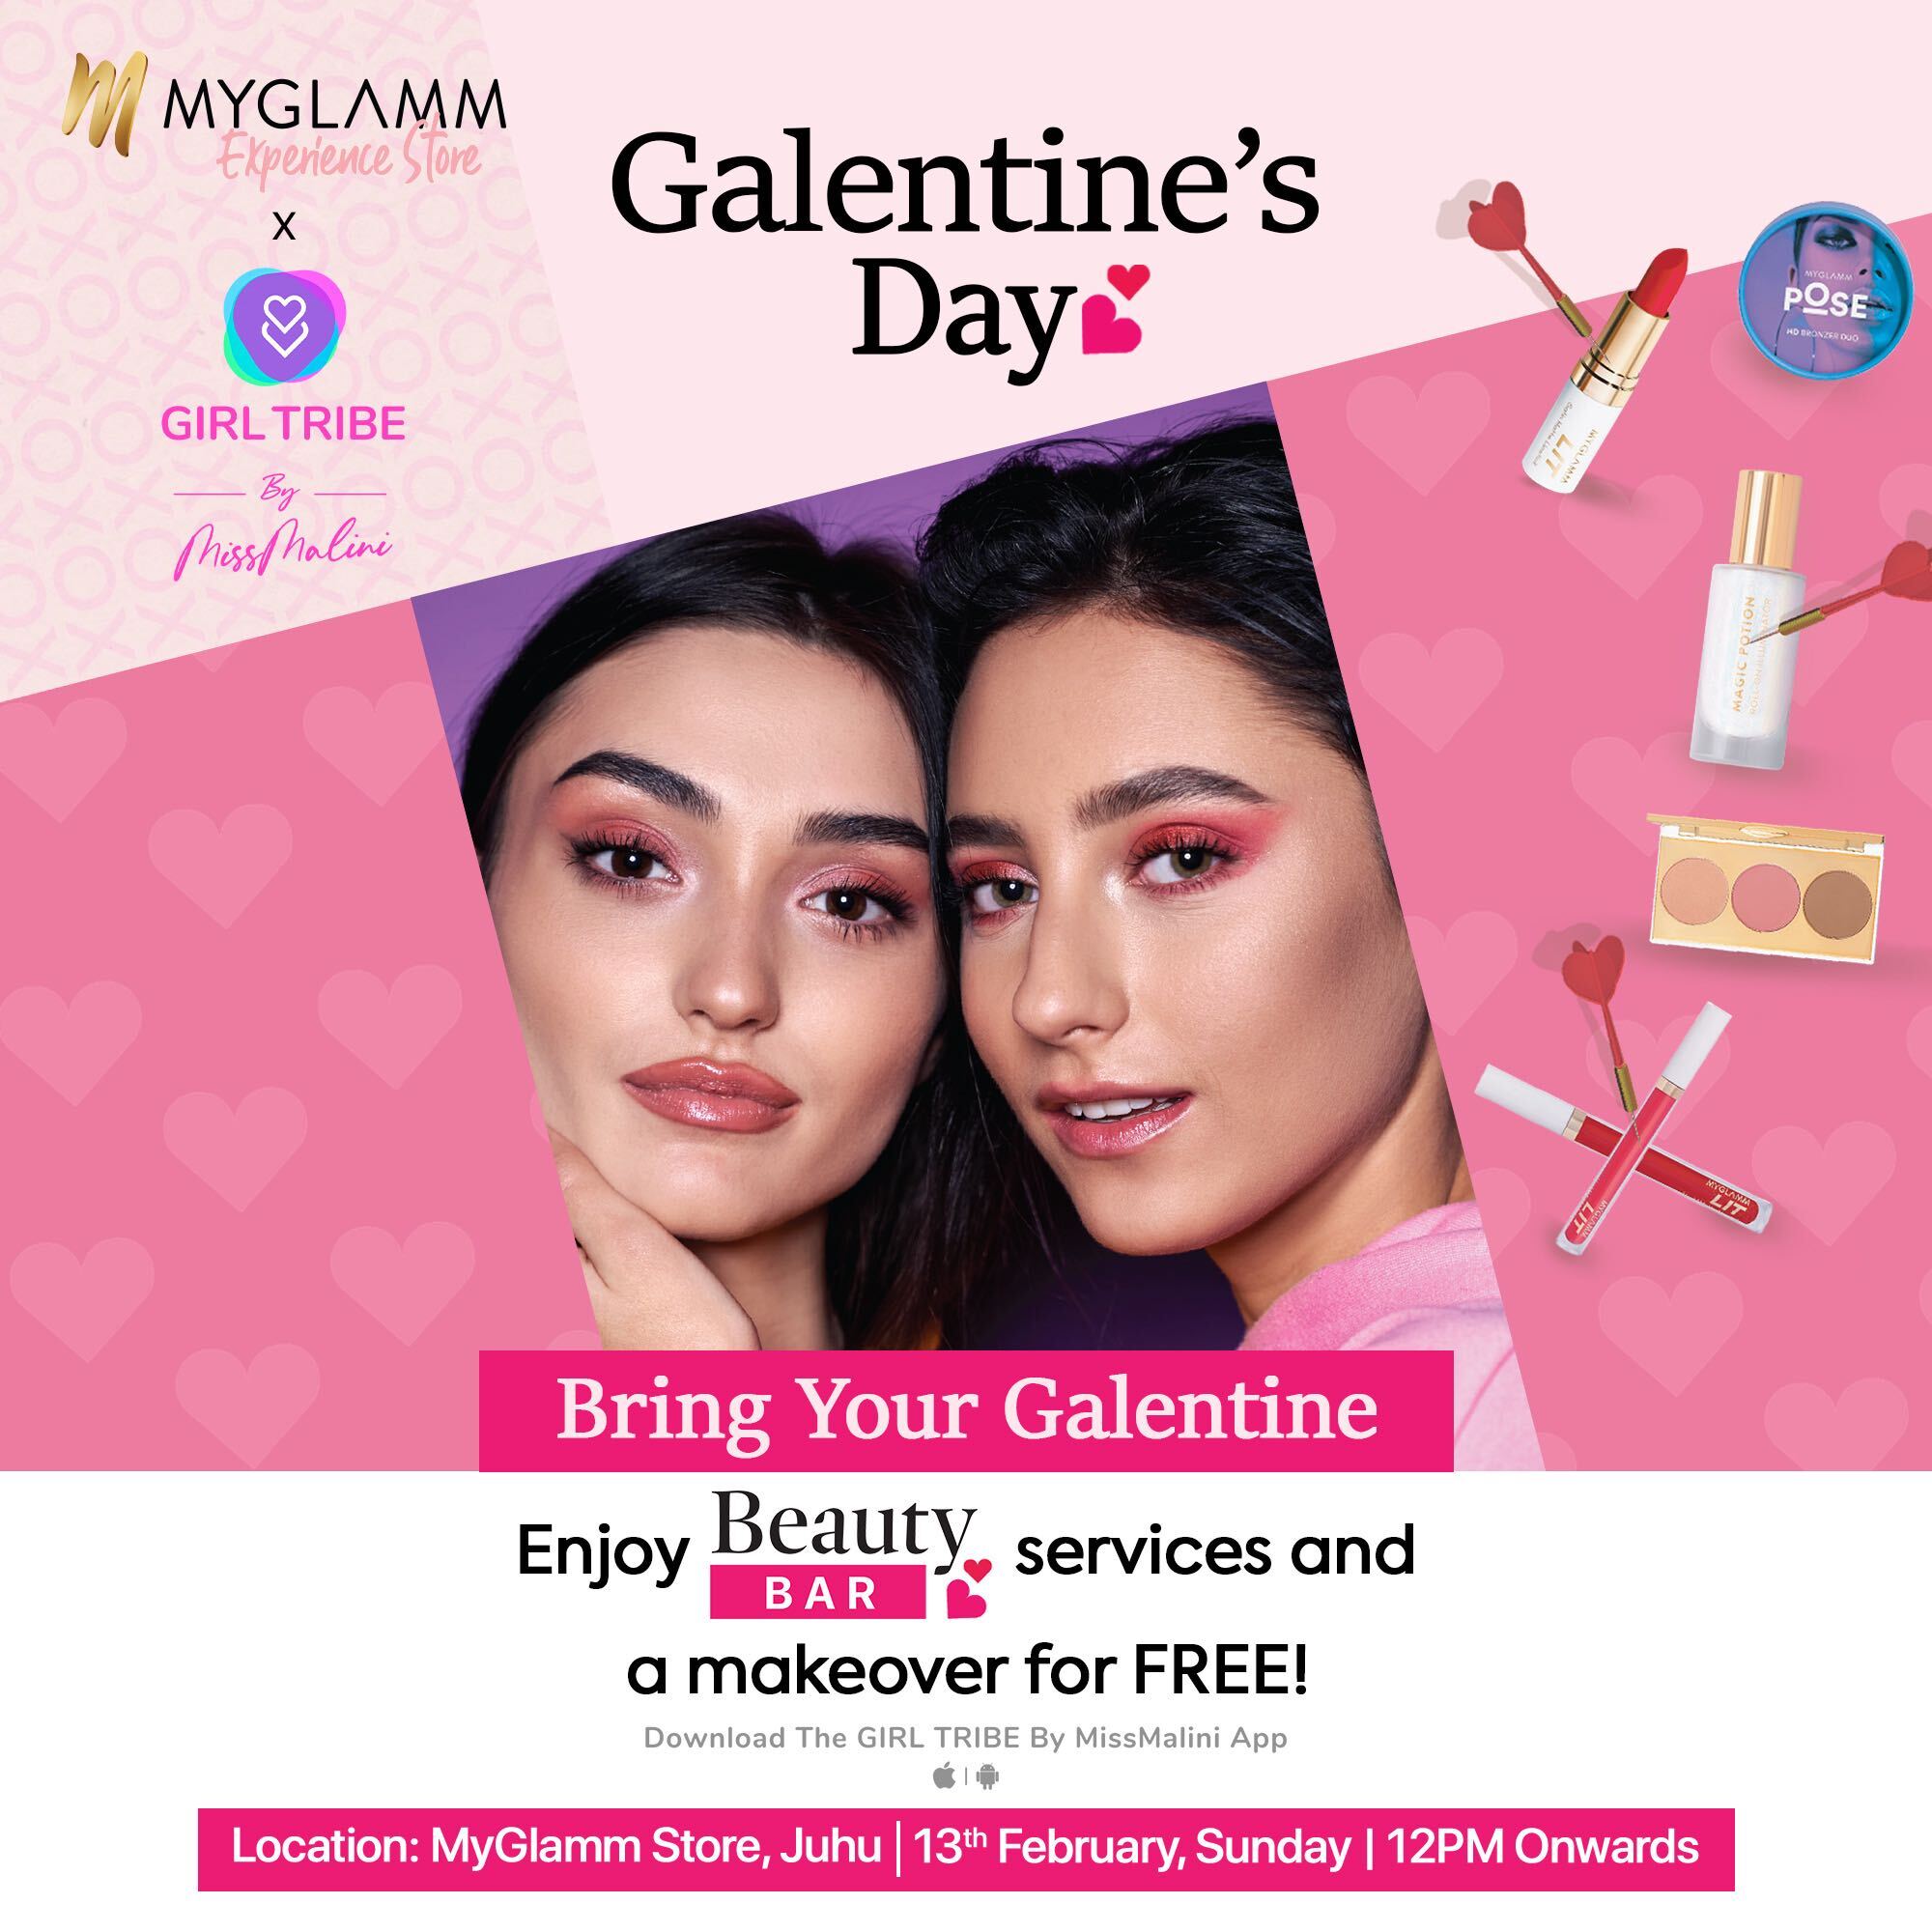 Galentine's Day Event at MyGlamm's Experience Store, Juhu